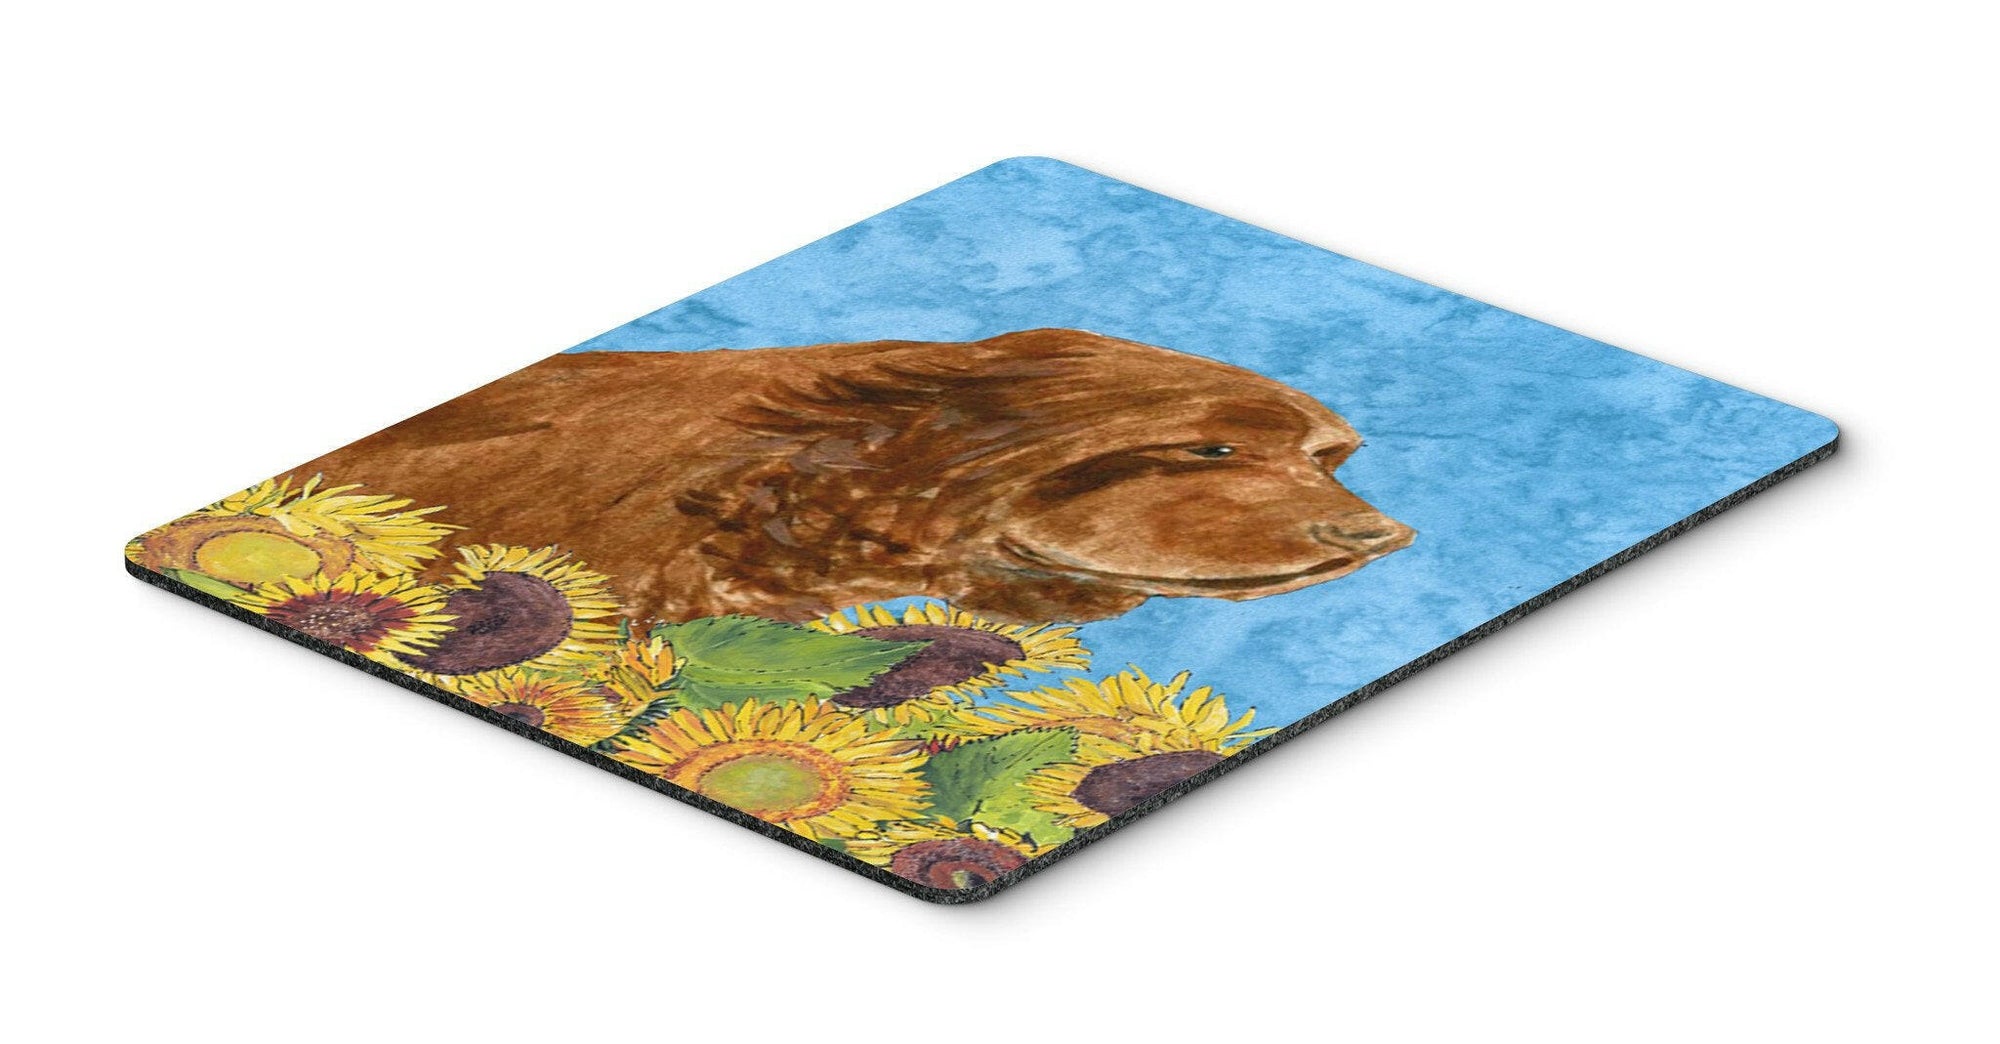 Sussex Spaniel Mouse Pad, Hot Pad or Trivet by Caroline's Treasures